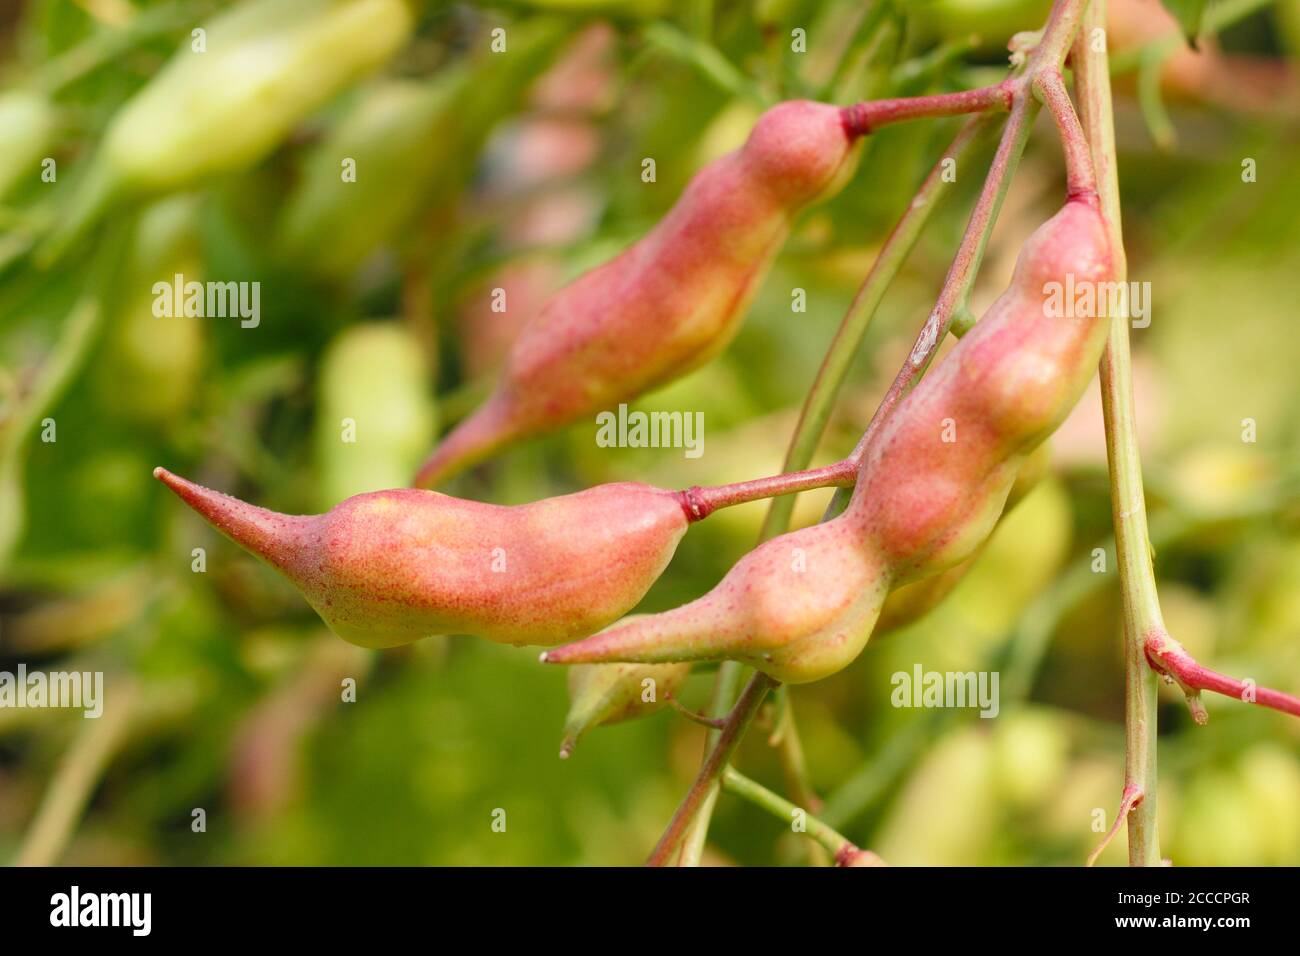 Raphanus sativus 'French Breakfast'. Radish seed pods displaying characteristic pink hues consequent to letting a plant go to seed. UK Stock Photo